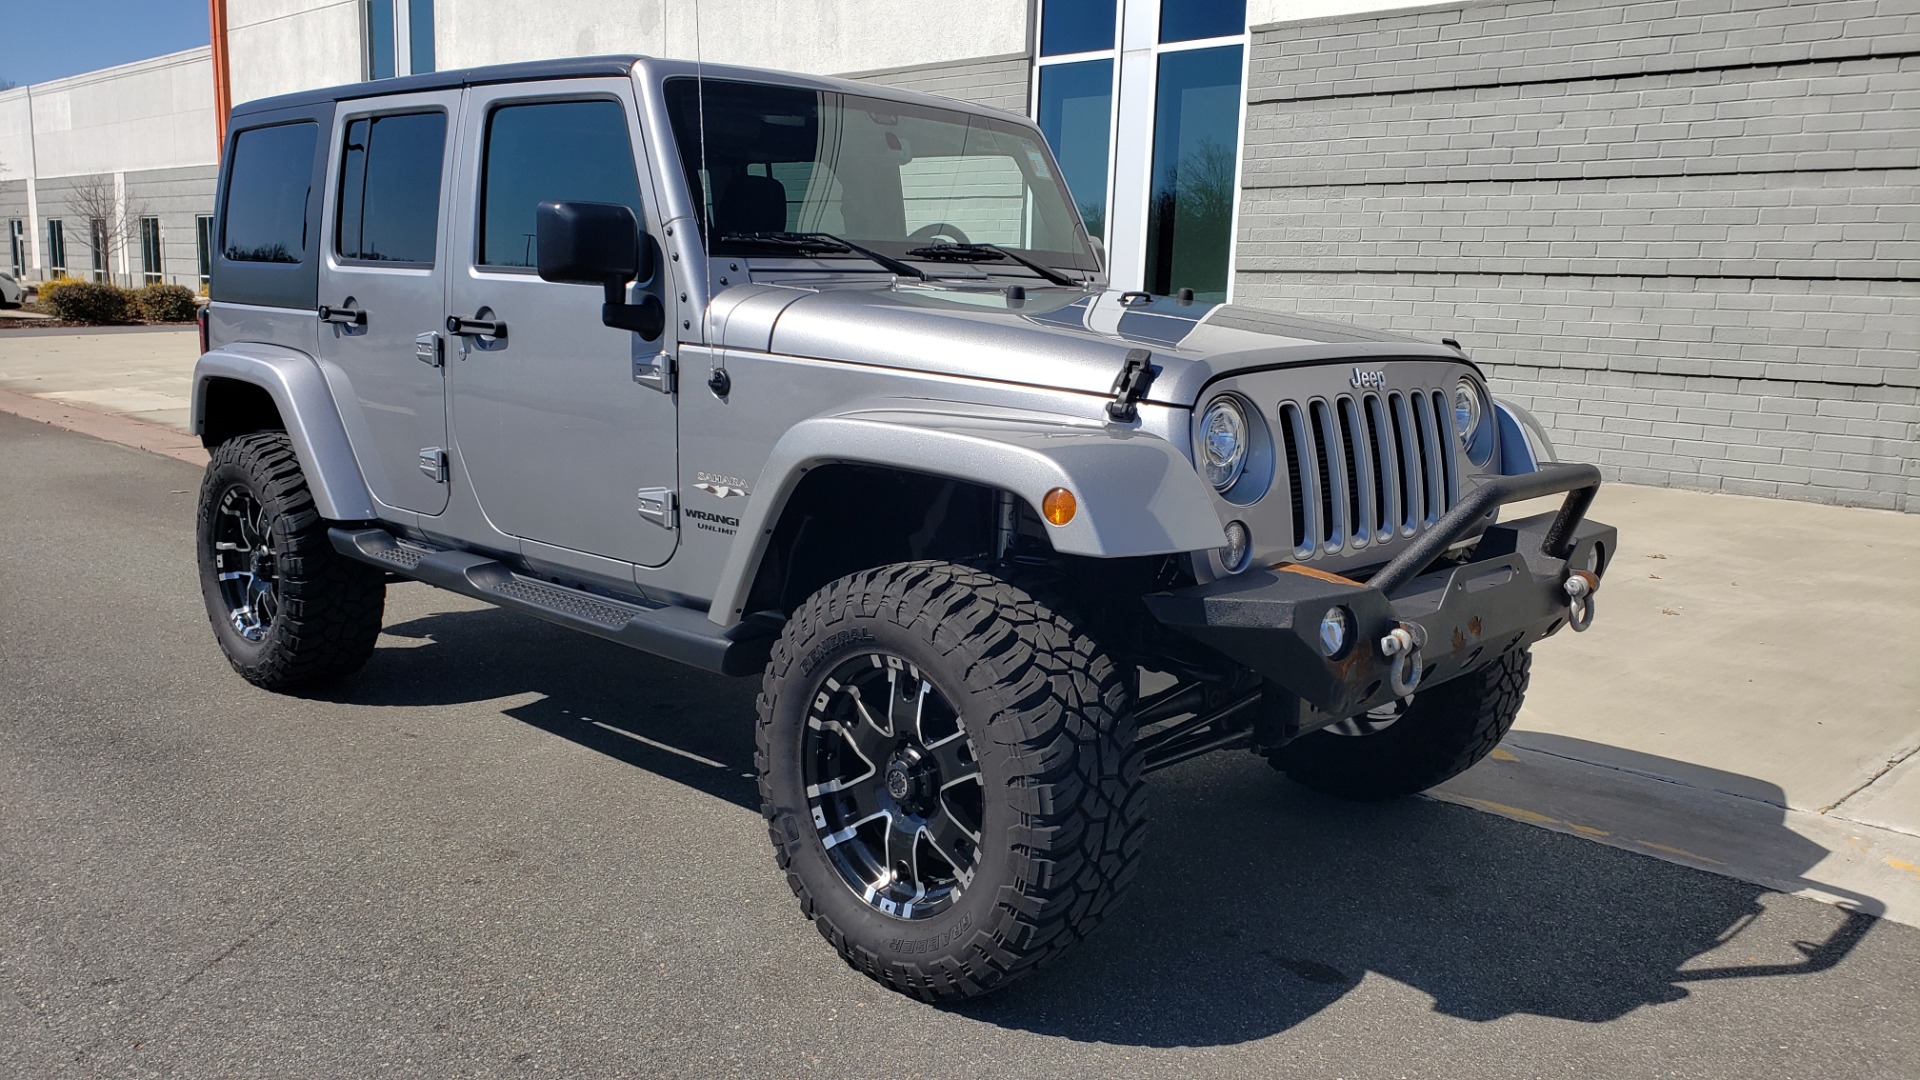 Used 2017 Jeep WRANGLER UNLIMITED SAHARA 4X4 / 3-PC FREEDOM TOP / 3.6L V6 / 5-SPD AUTO for sale Sold at Formula Imports in Charlotte NC 28227 11